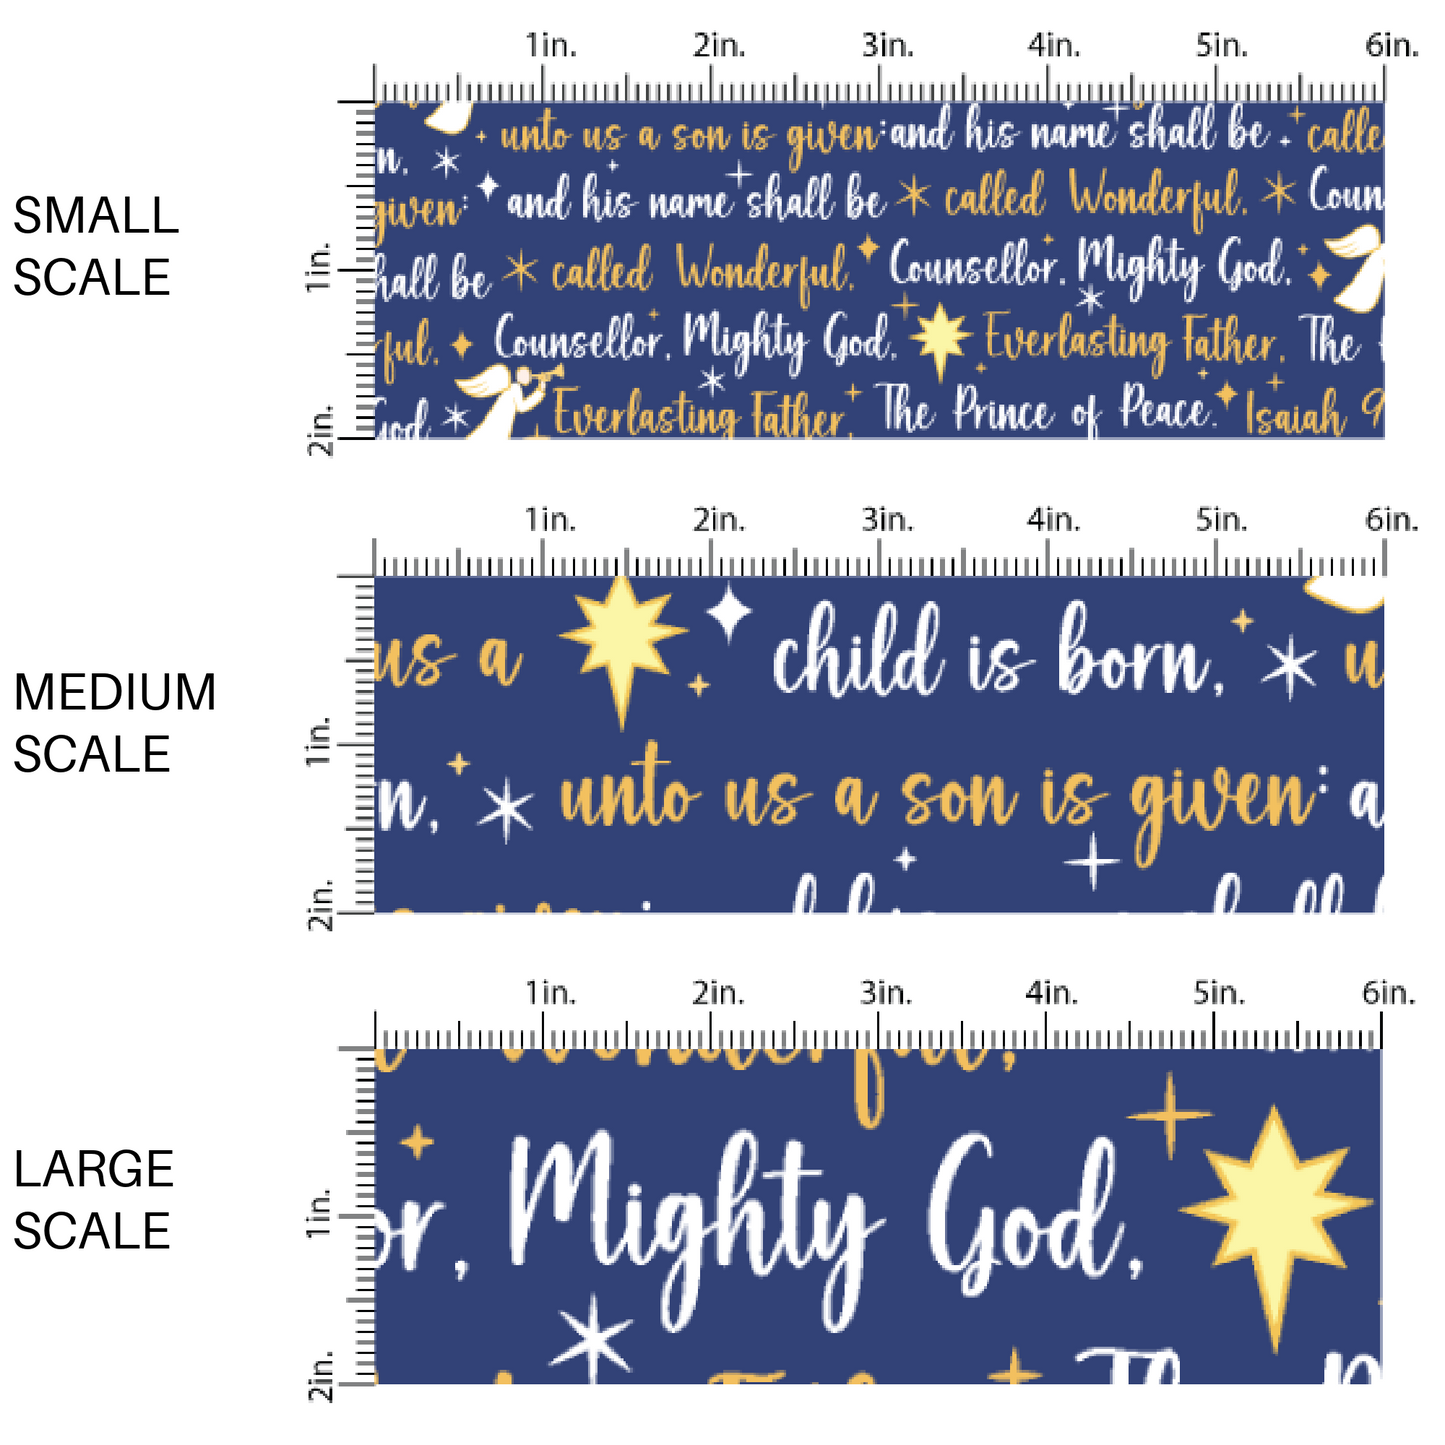 Popular Religious Christmas Sayings on Blue Fabric by the Yard scaled image guide.